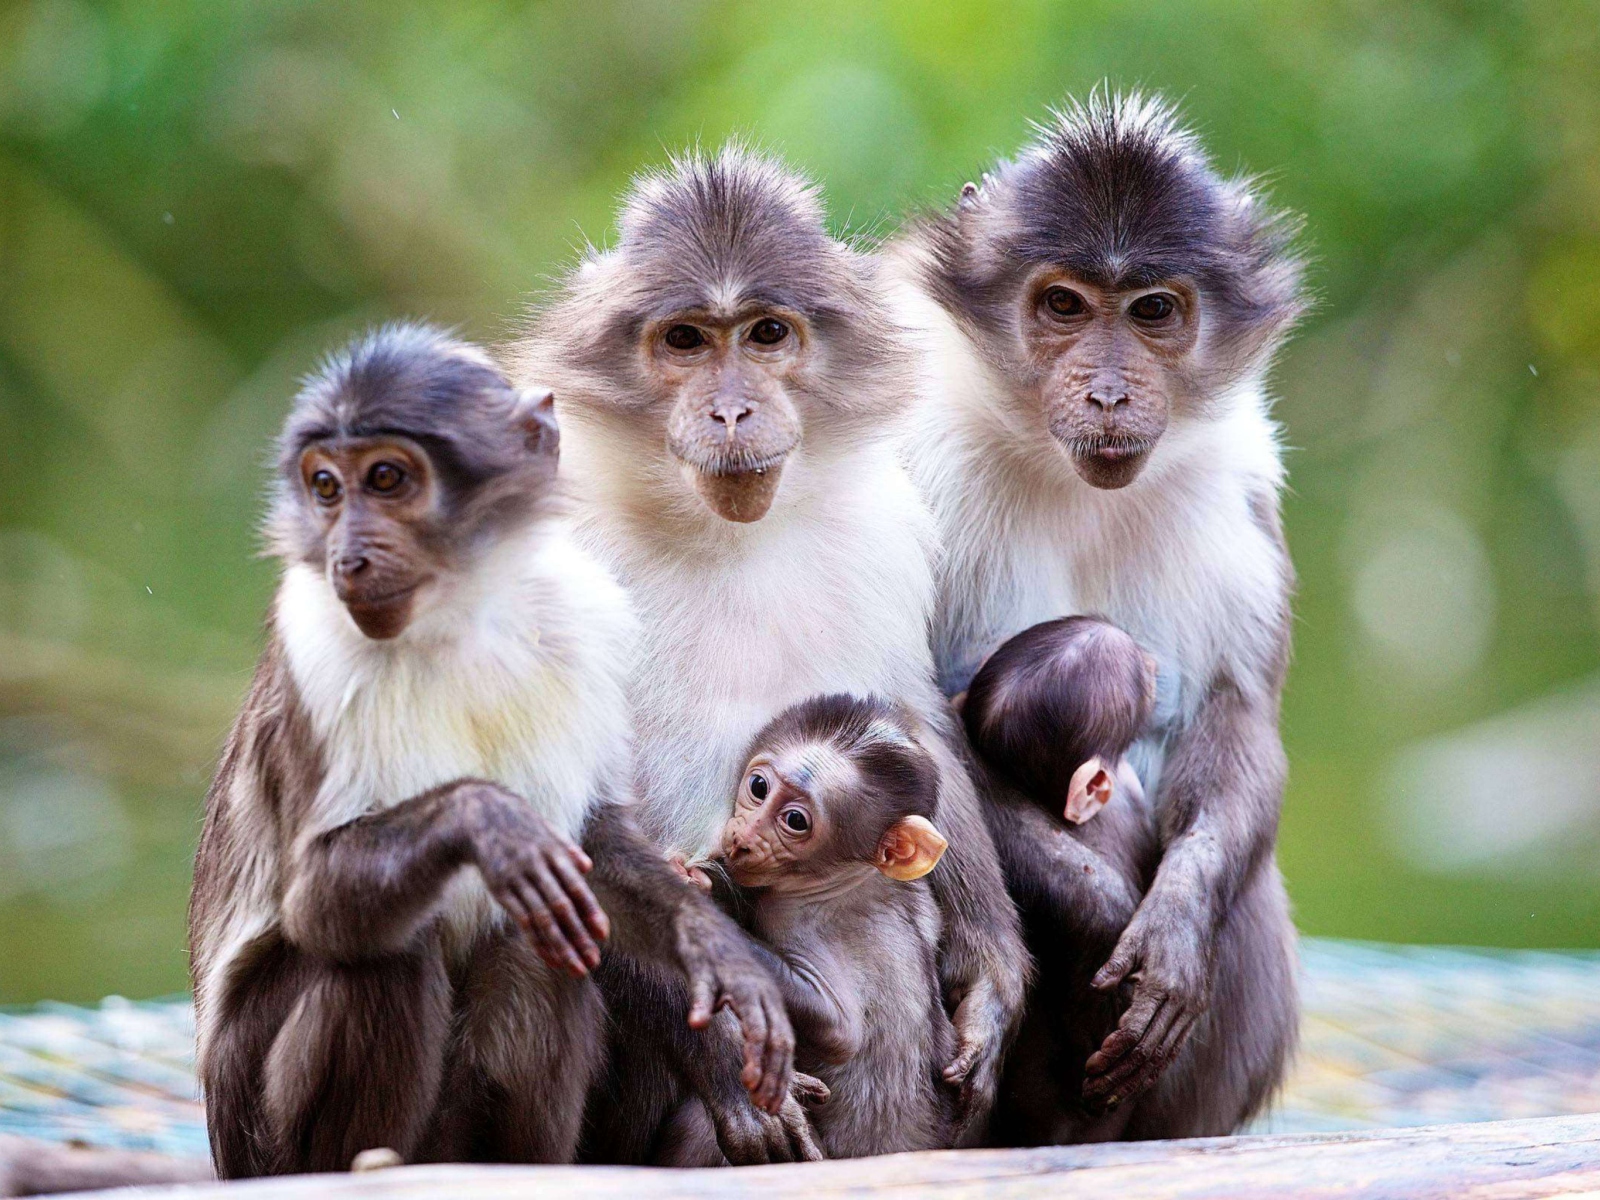 Funny Monkeys With Their Babies wallpaper 1600x1200